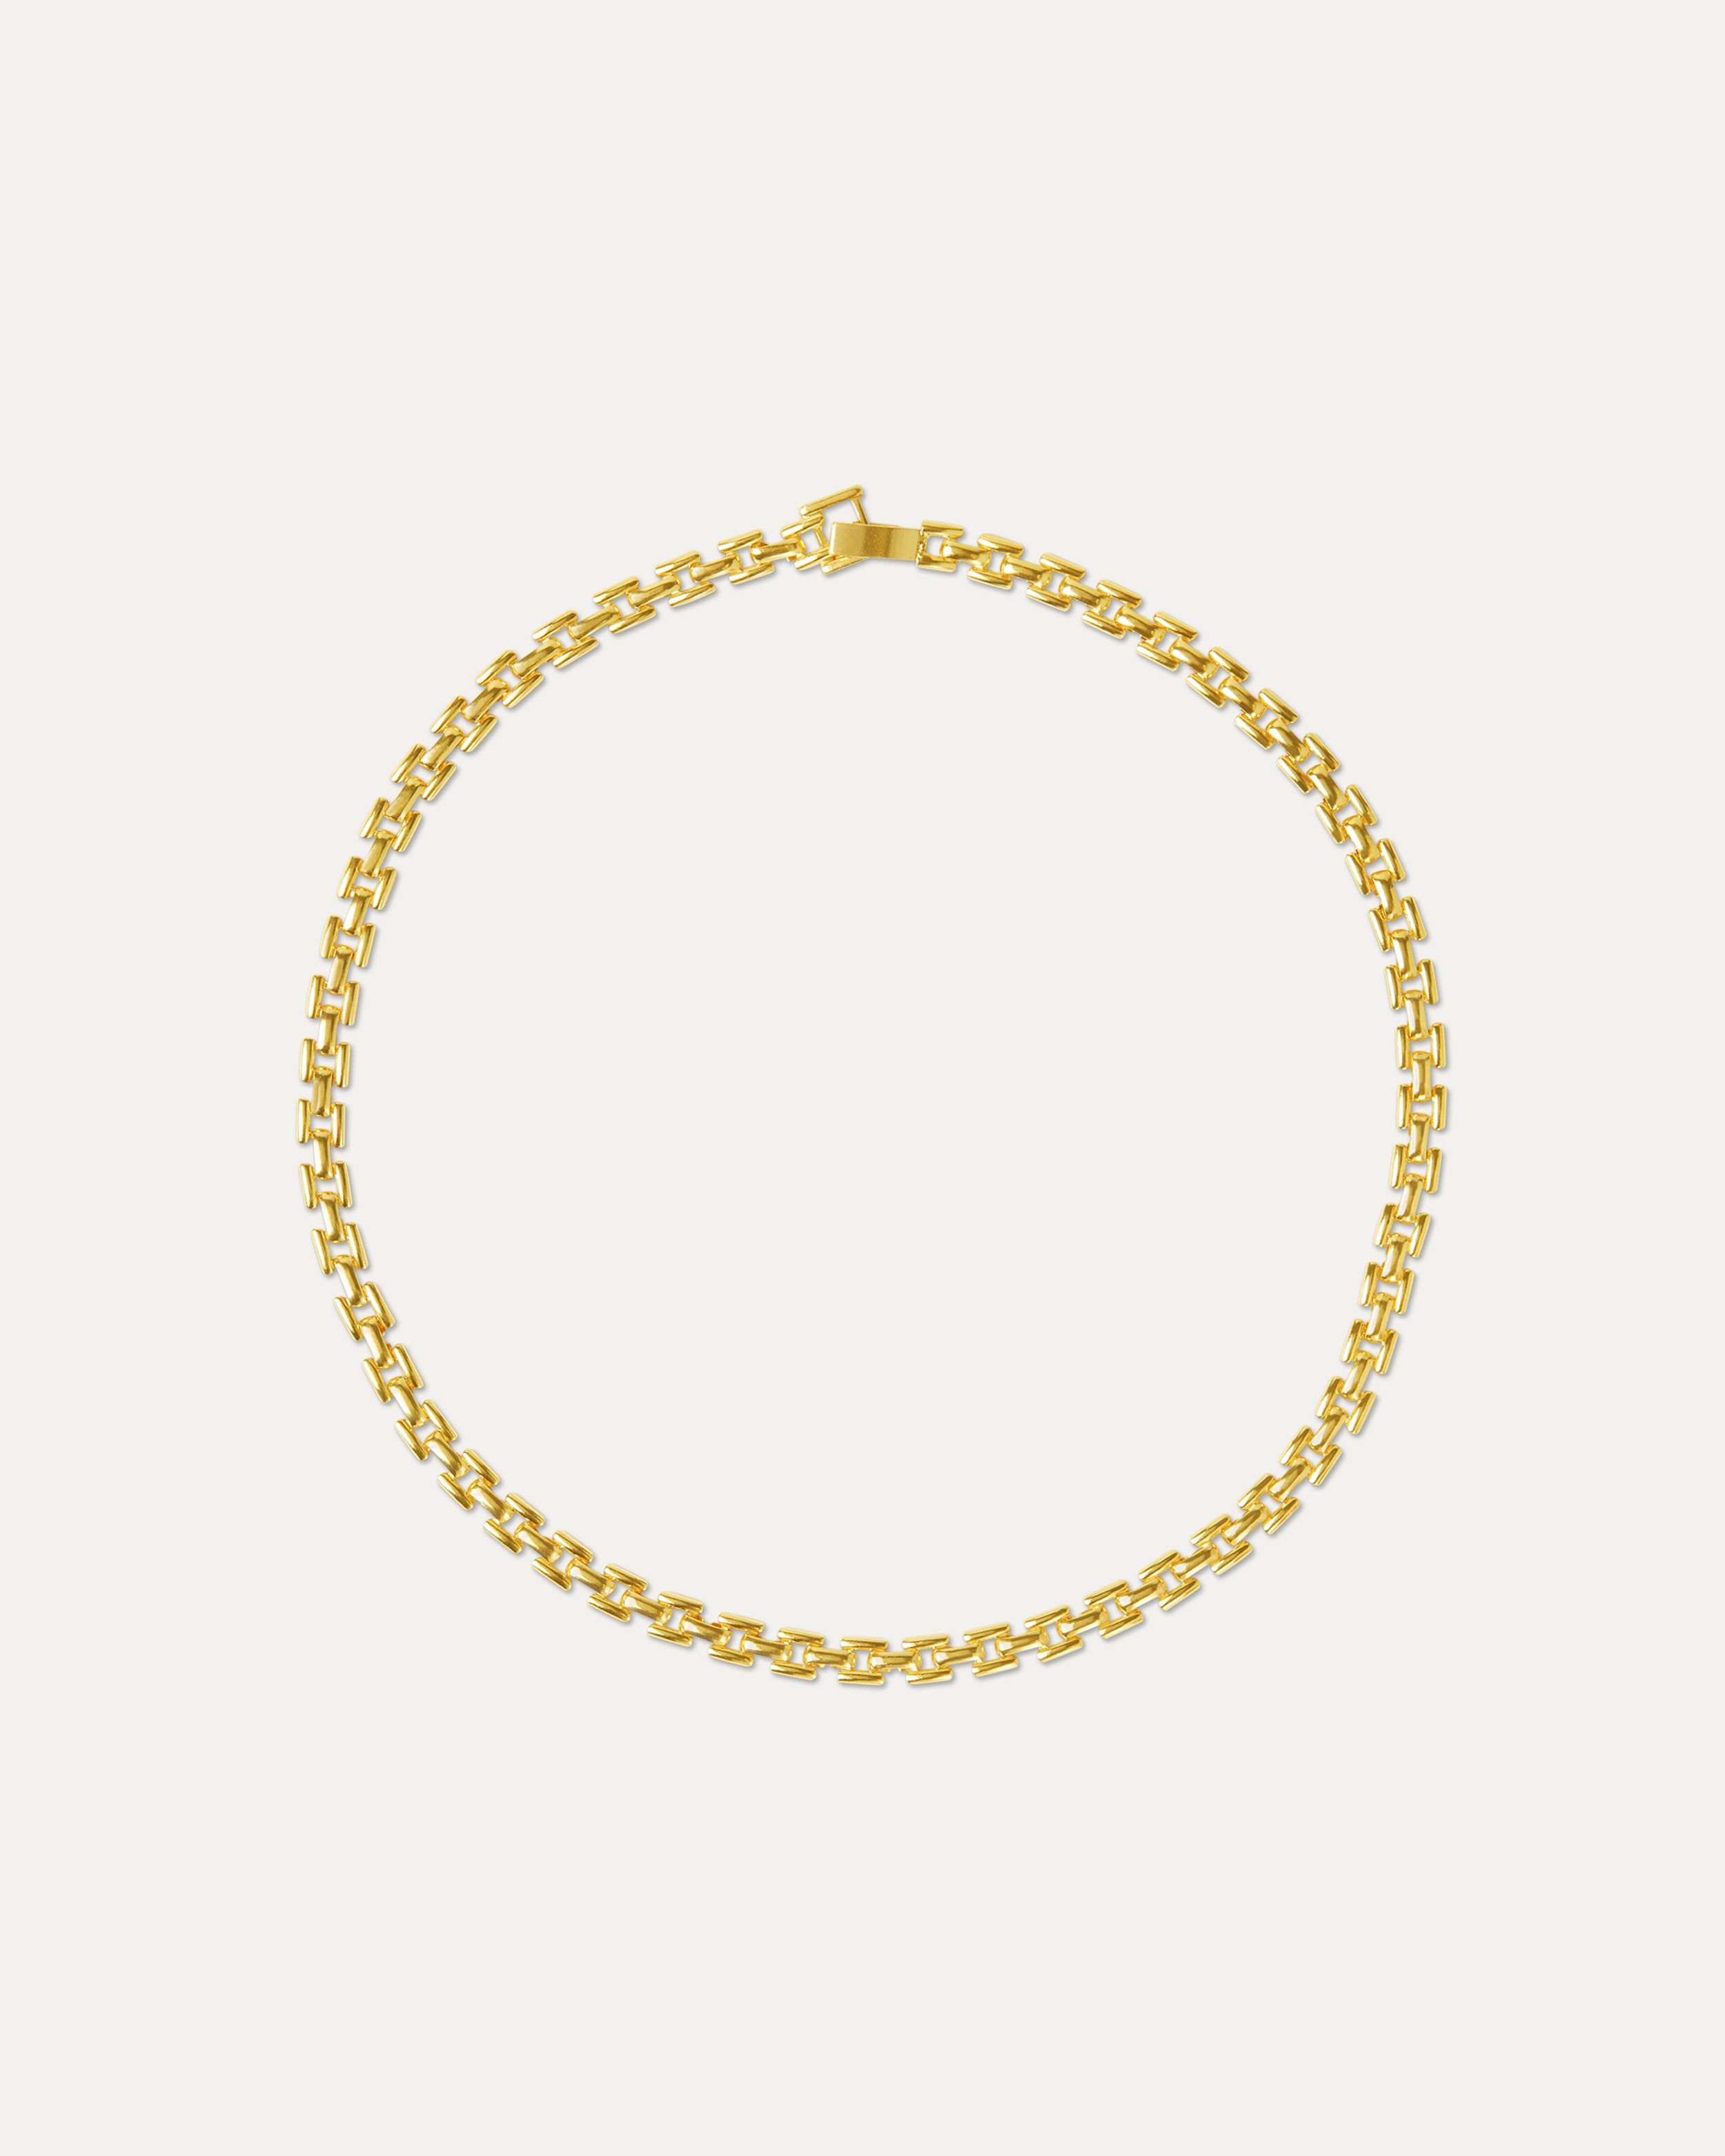 Hazel Chain Necklace | Sustainable Jewellery by Ottoman Hands